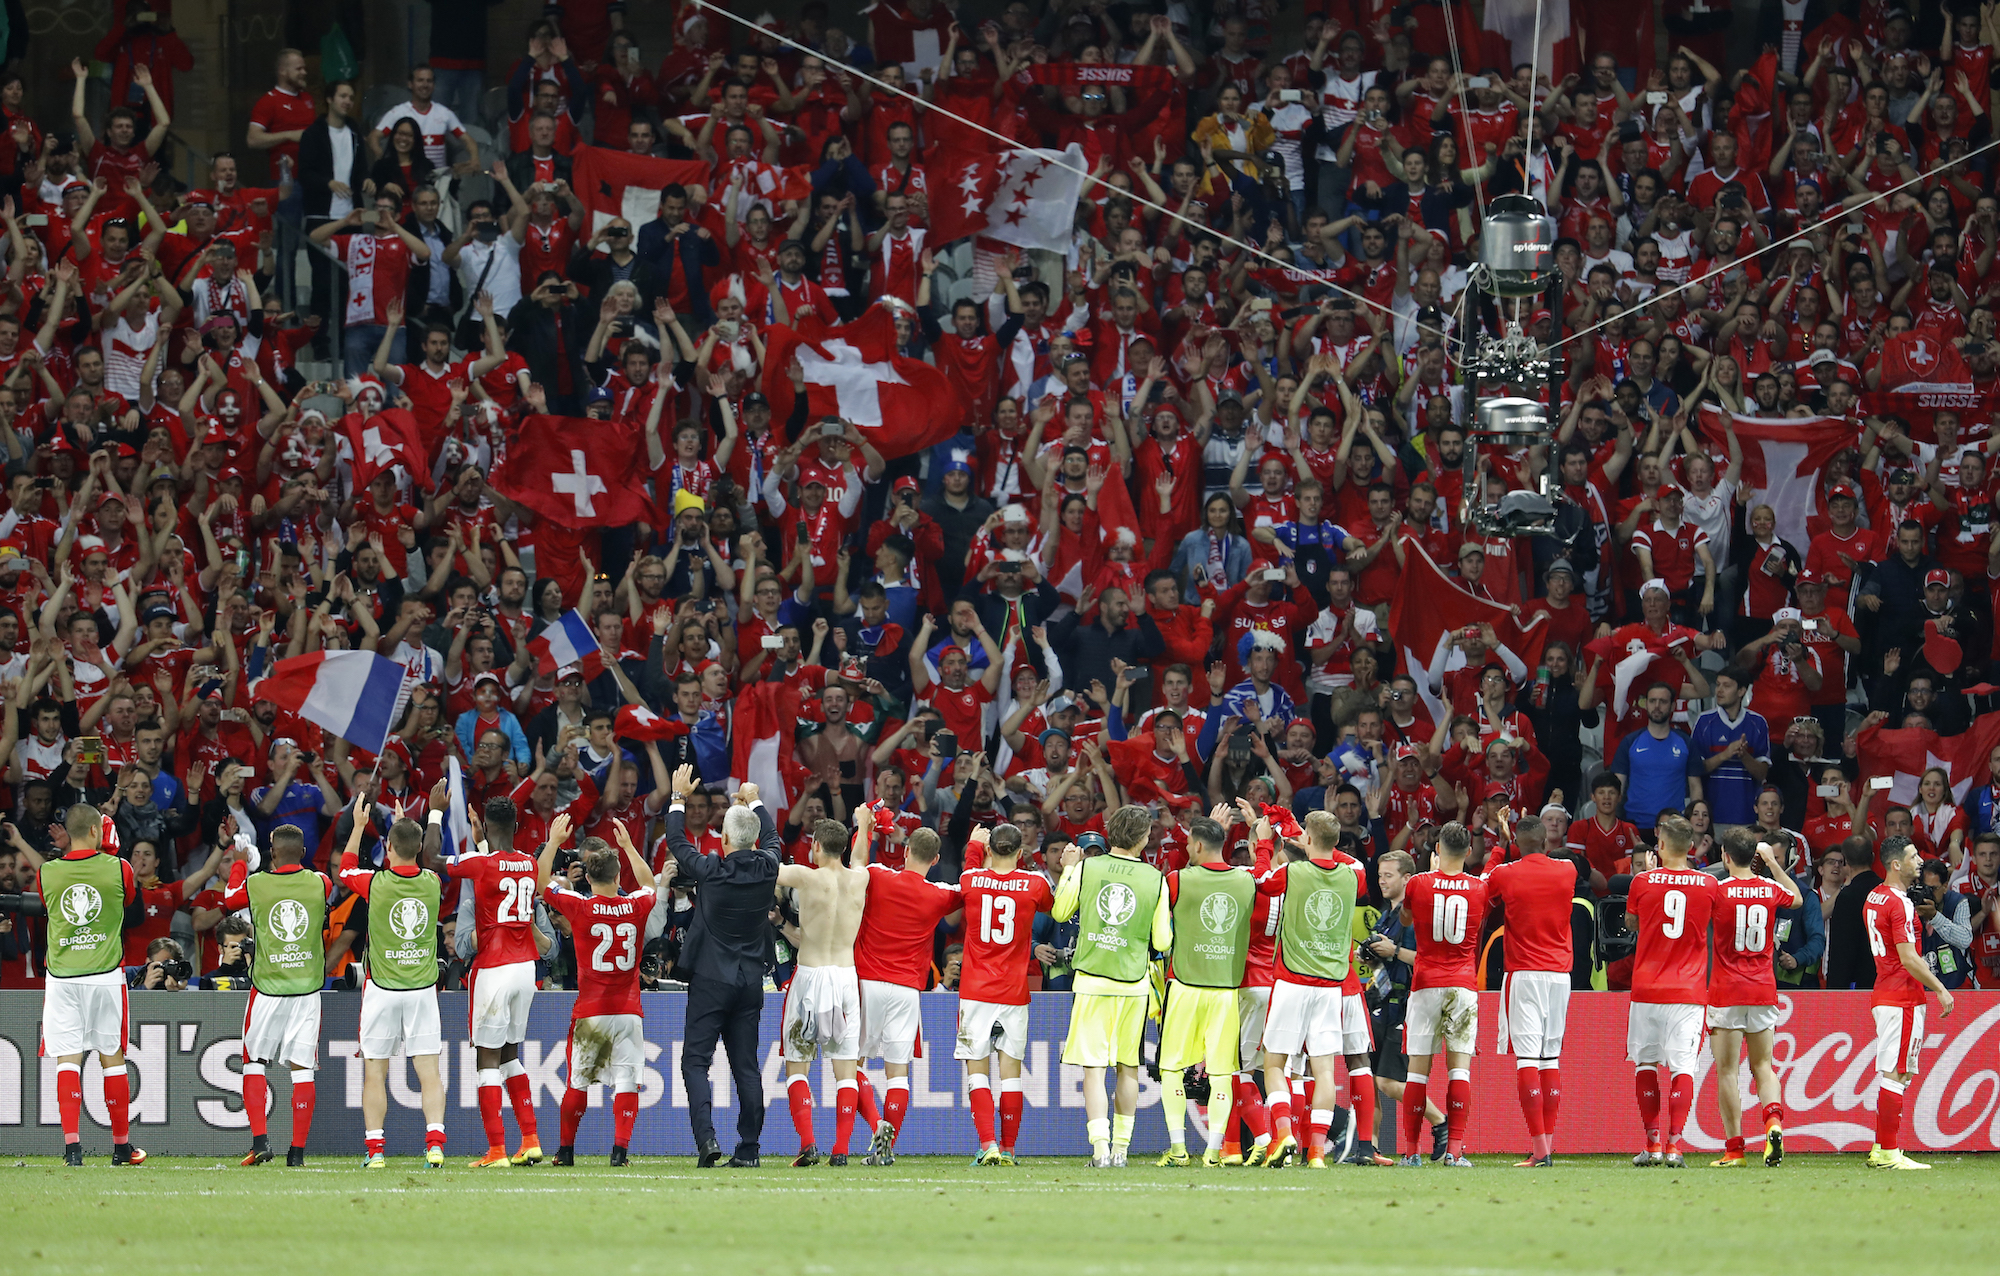 Football Soccer - Switzerland v France - EURO 2016 - Group A - Stade Pierre-Mauroy, Lille, France - 19/6/16 Switzerland players in front of fans at the end of the match REUTERS/Pascal Rossignol Livepic